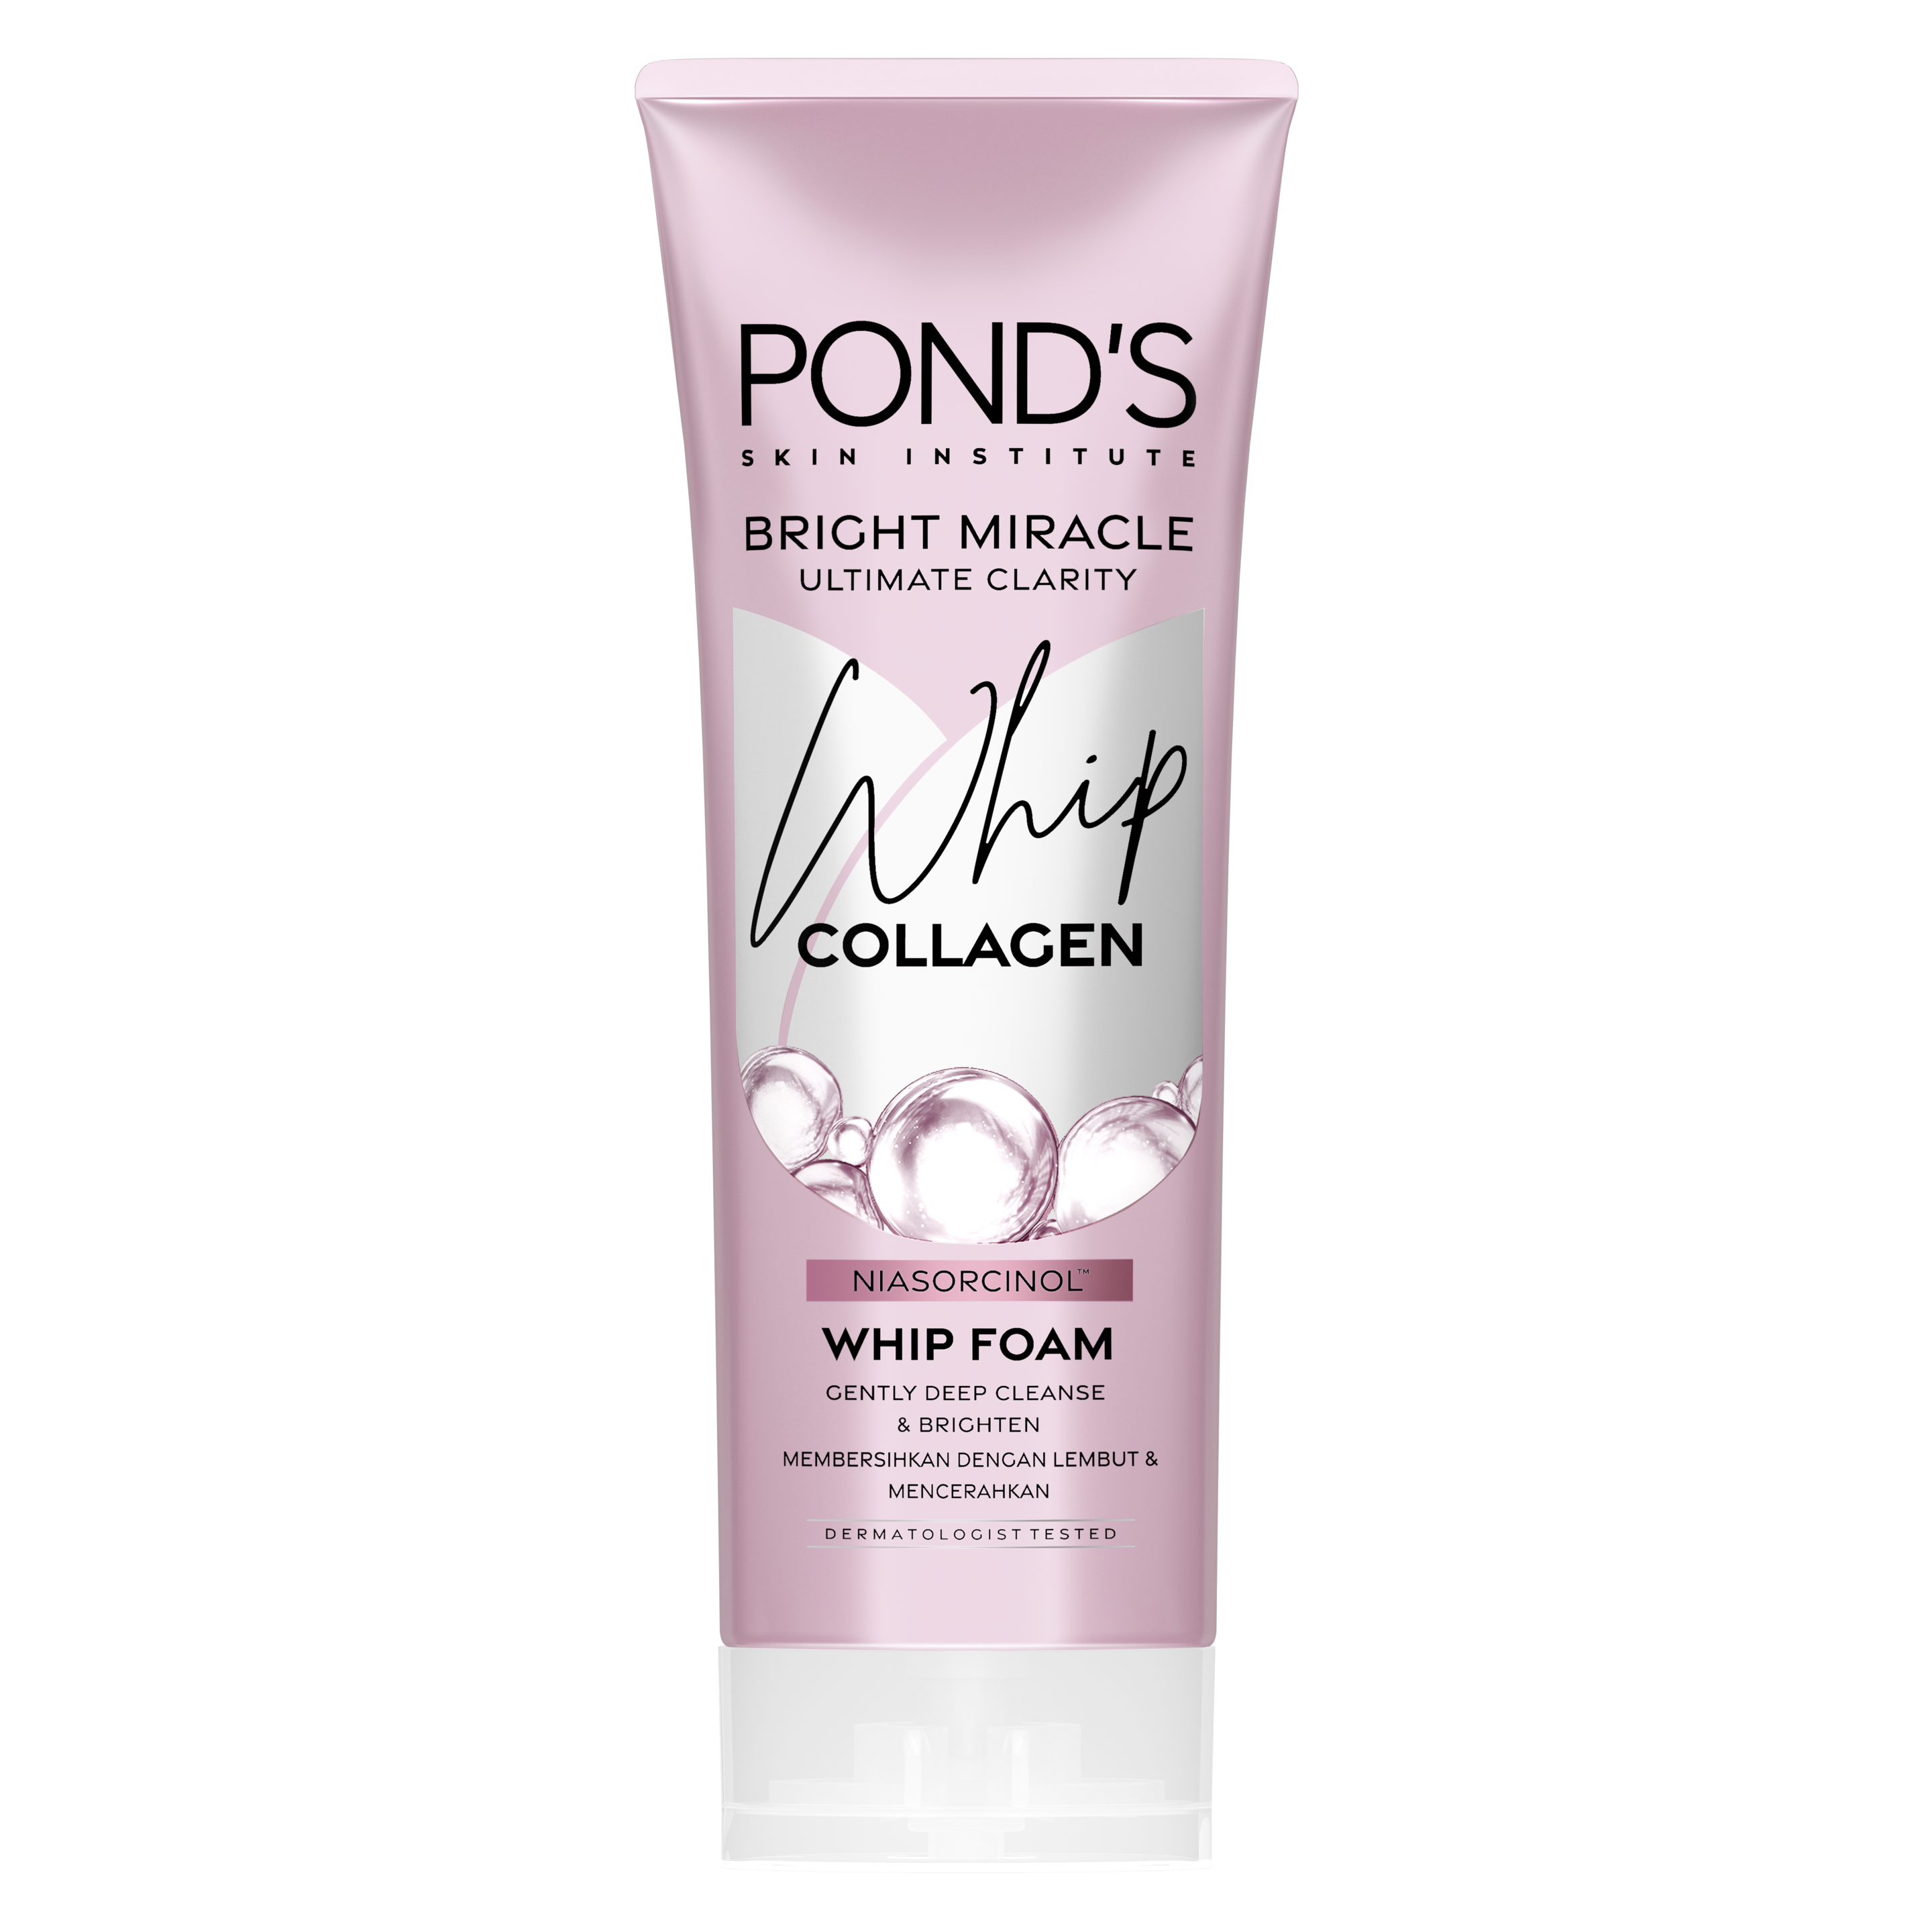 Pond's Bright Miracle Ultimate Clarity Facial Whip Foam